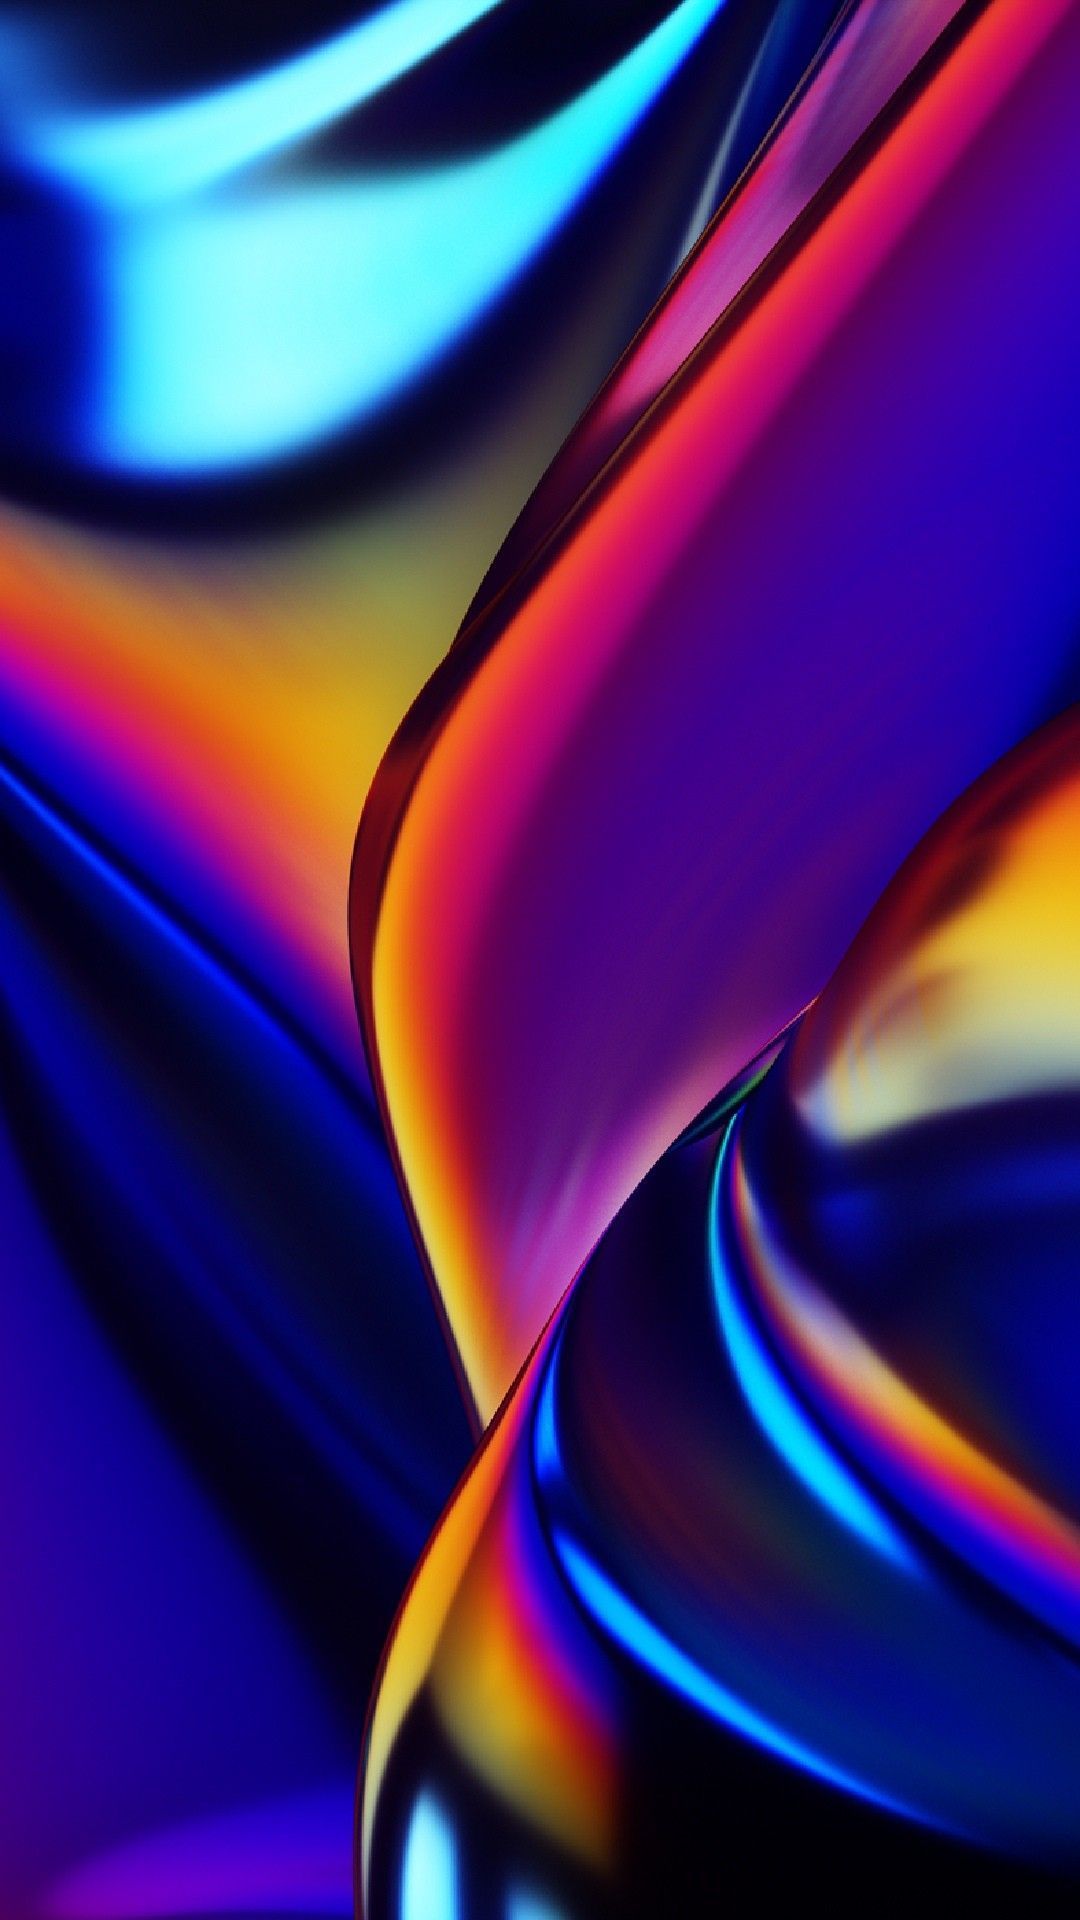 3D Colorful Wallpaper High Definition Hupages Download iPhone Wallpaper. Abstract iphone wallpaper, Android wallpaper, Colorful wallpaper